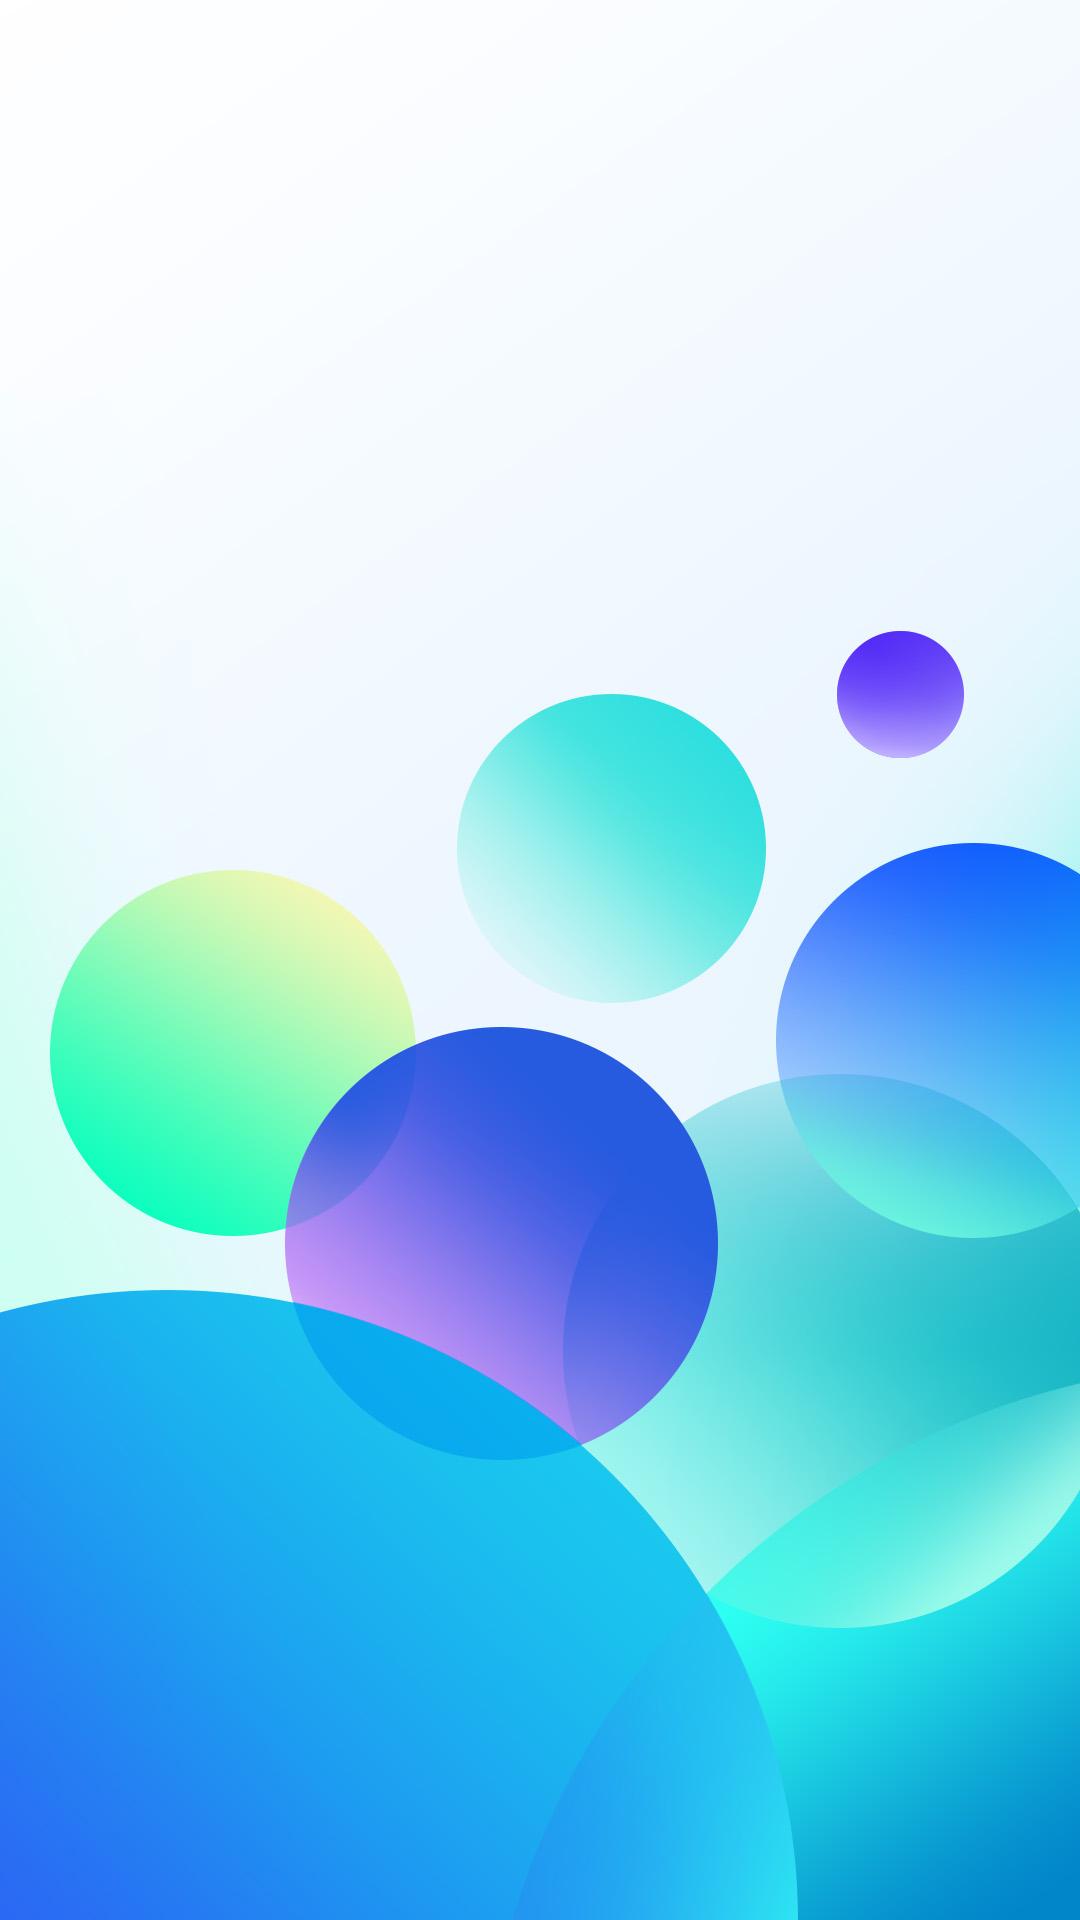 Flyme OS 5.0 HD wallpapers Mohamedovic 8